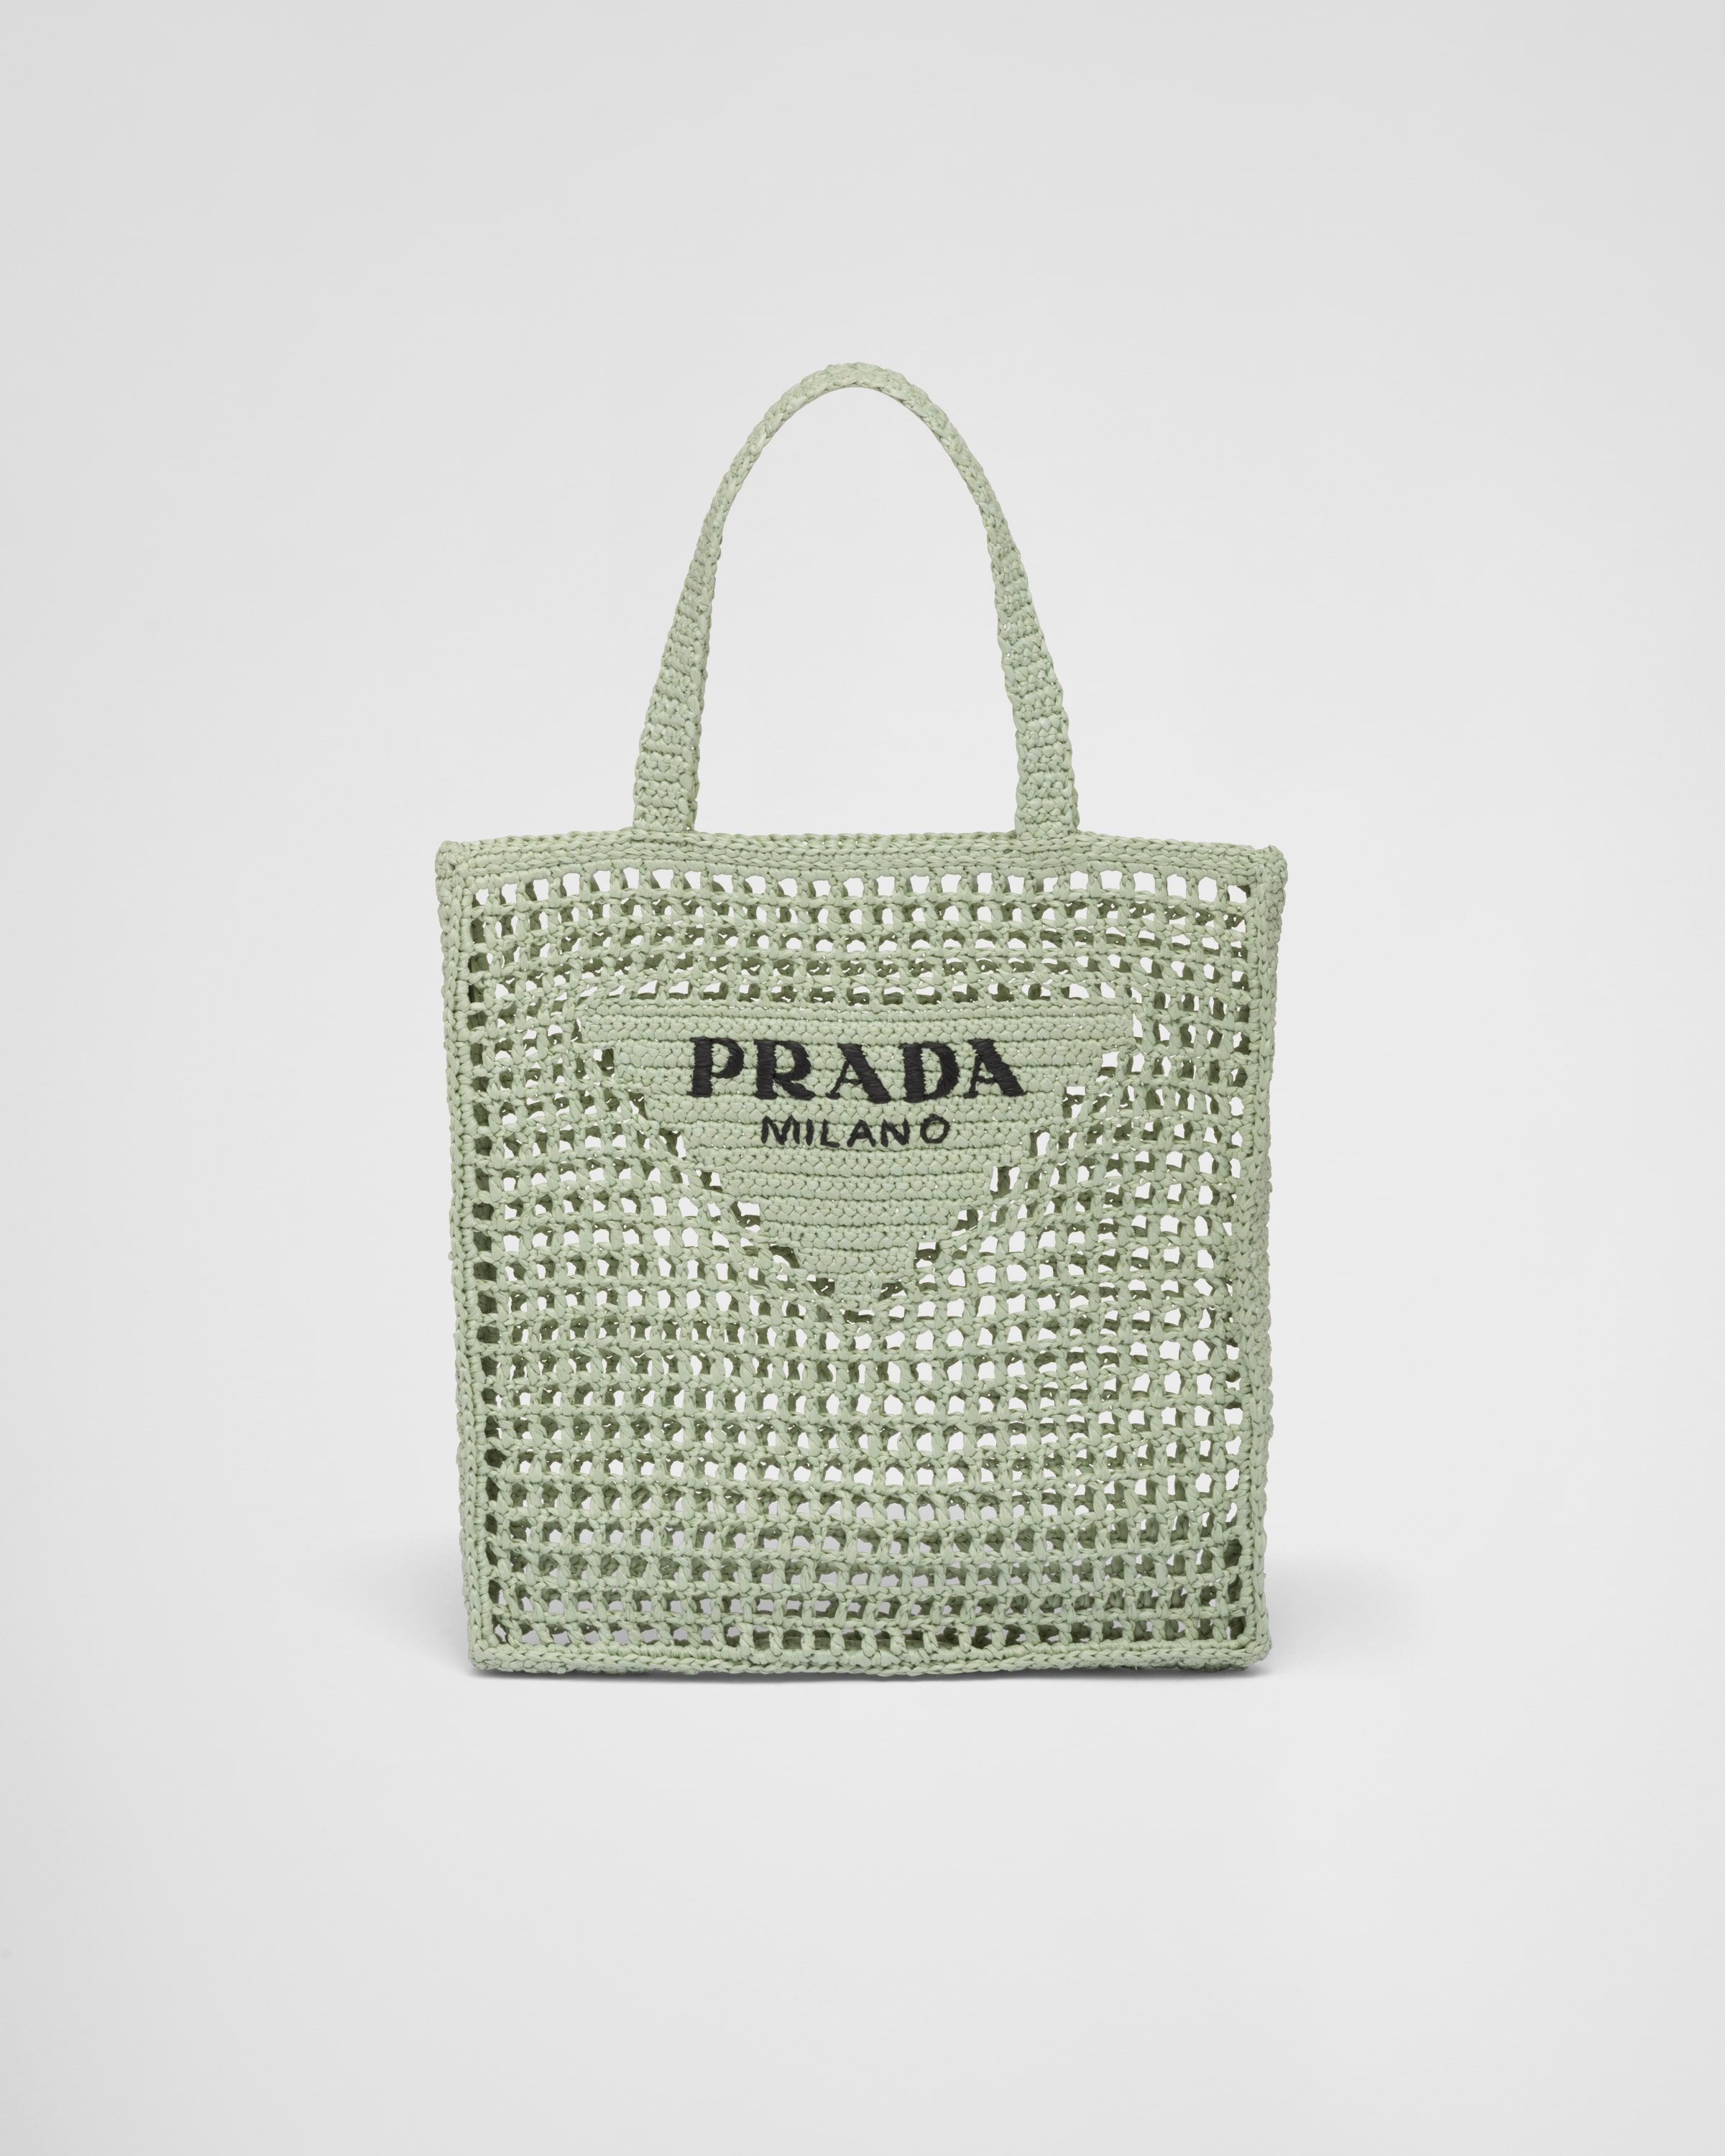 <p><strong>$2050.00</strong></p><p><a href="https://go.redirectingat.com?id=74968X1553576&url=https%3A%2F%2Fwww.prada.com%2Fus%2Fen%2Fp%2Fcrochet-tote-bag%2F1BG393_2A2T_F0934_V_OOO&sref=https%3A%2F%2Fwww.elle.com%2Ffashion%2Fg45233529%2Fbest-designer-tote-bags%2F">Shop Now</a></p><p>Could there be anything chicer than a crochet Prada tote on the beach? I think not.</p><p><strong>Material: </strong>Raffia-effect yarn</p><p><strong>Colors:</strong> Aqua, Petal Pink, White, Black</p><p><strong>Dimensions:</strong> Height: 14.96 inches; width: 14.17 inches; depth: 1.18 inches</p>